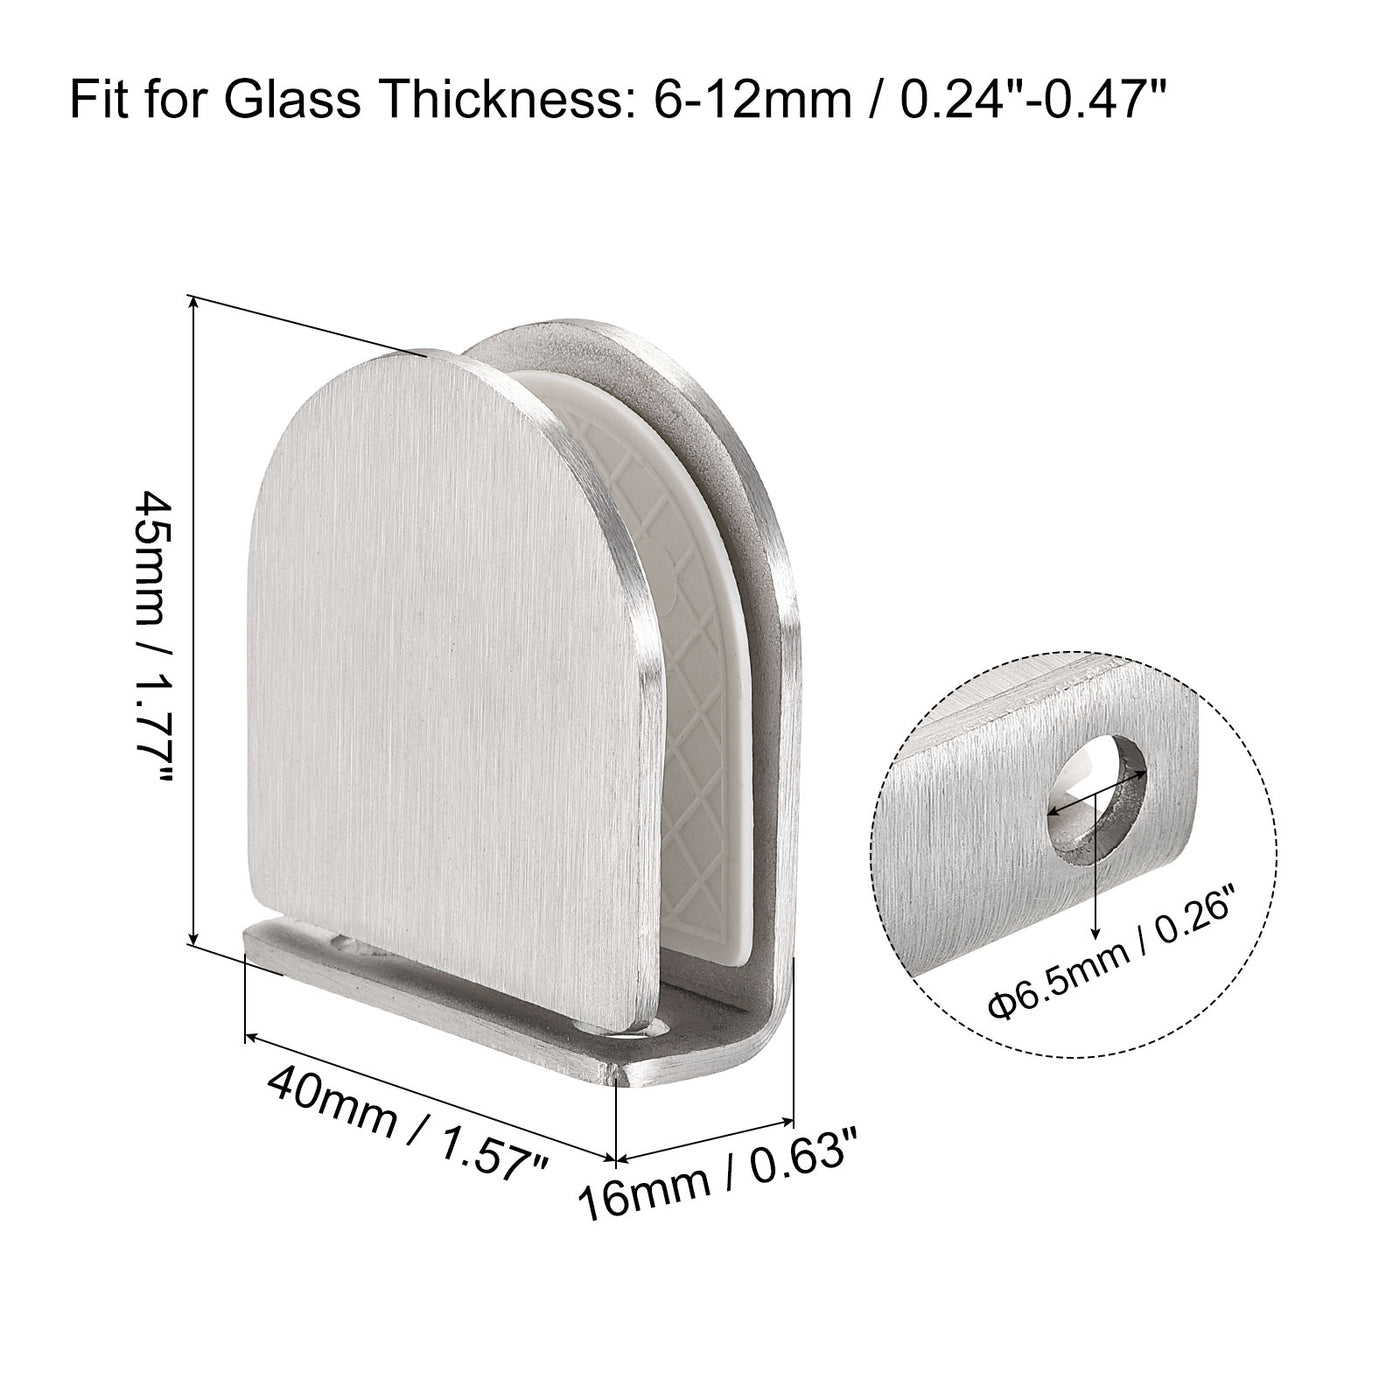 Uxcell Uxcell Glass Clamp, 2pcs Adjustable 6-12mm Thick 45x40mm Stainless Steel Glass Clip